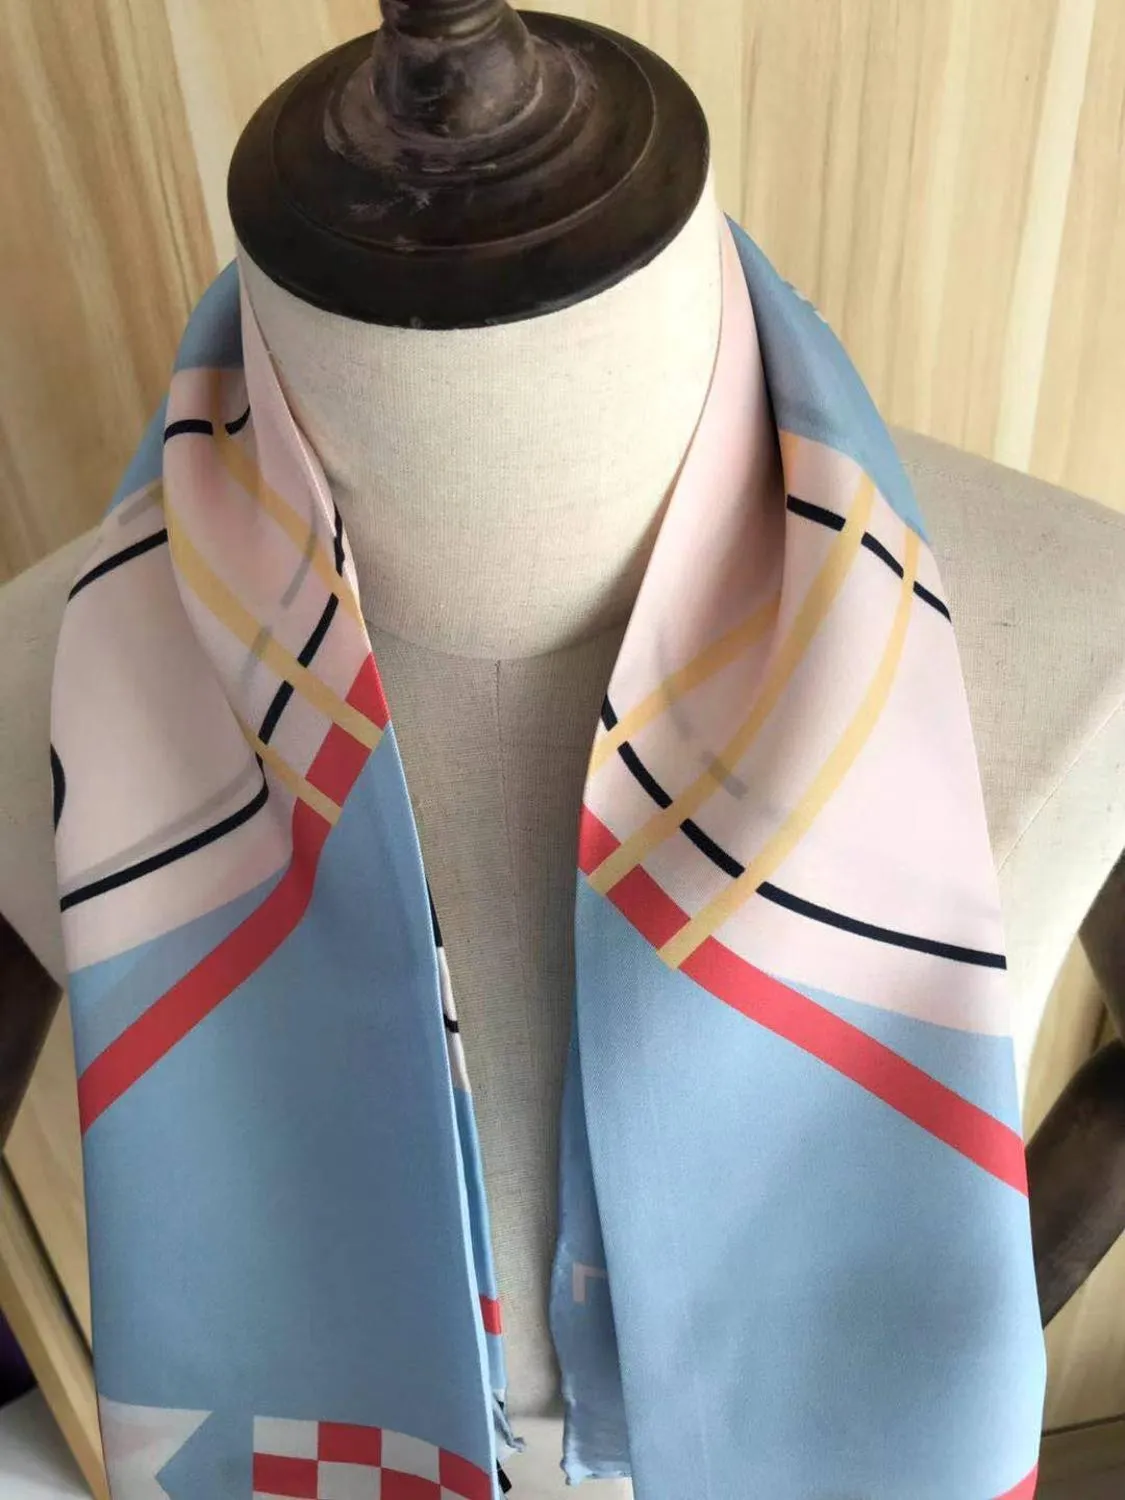 2020 arrival spring autumn classic chain 100% pure silk scarf twill hand made roll 90*90 cm shawl wrap for women lady gift